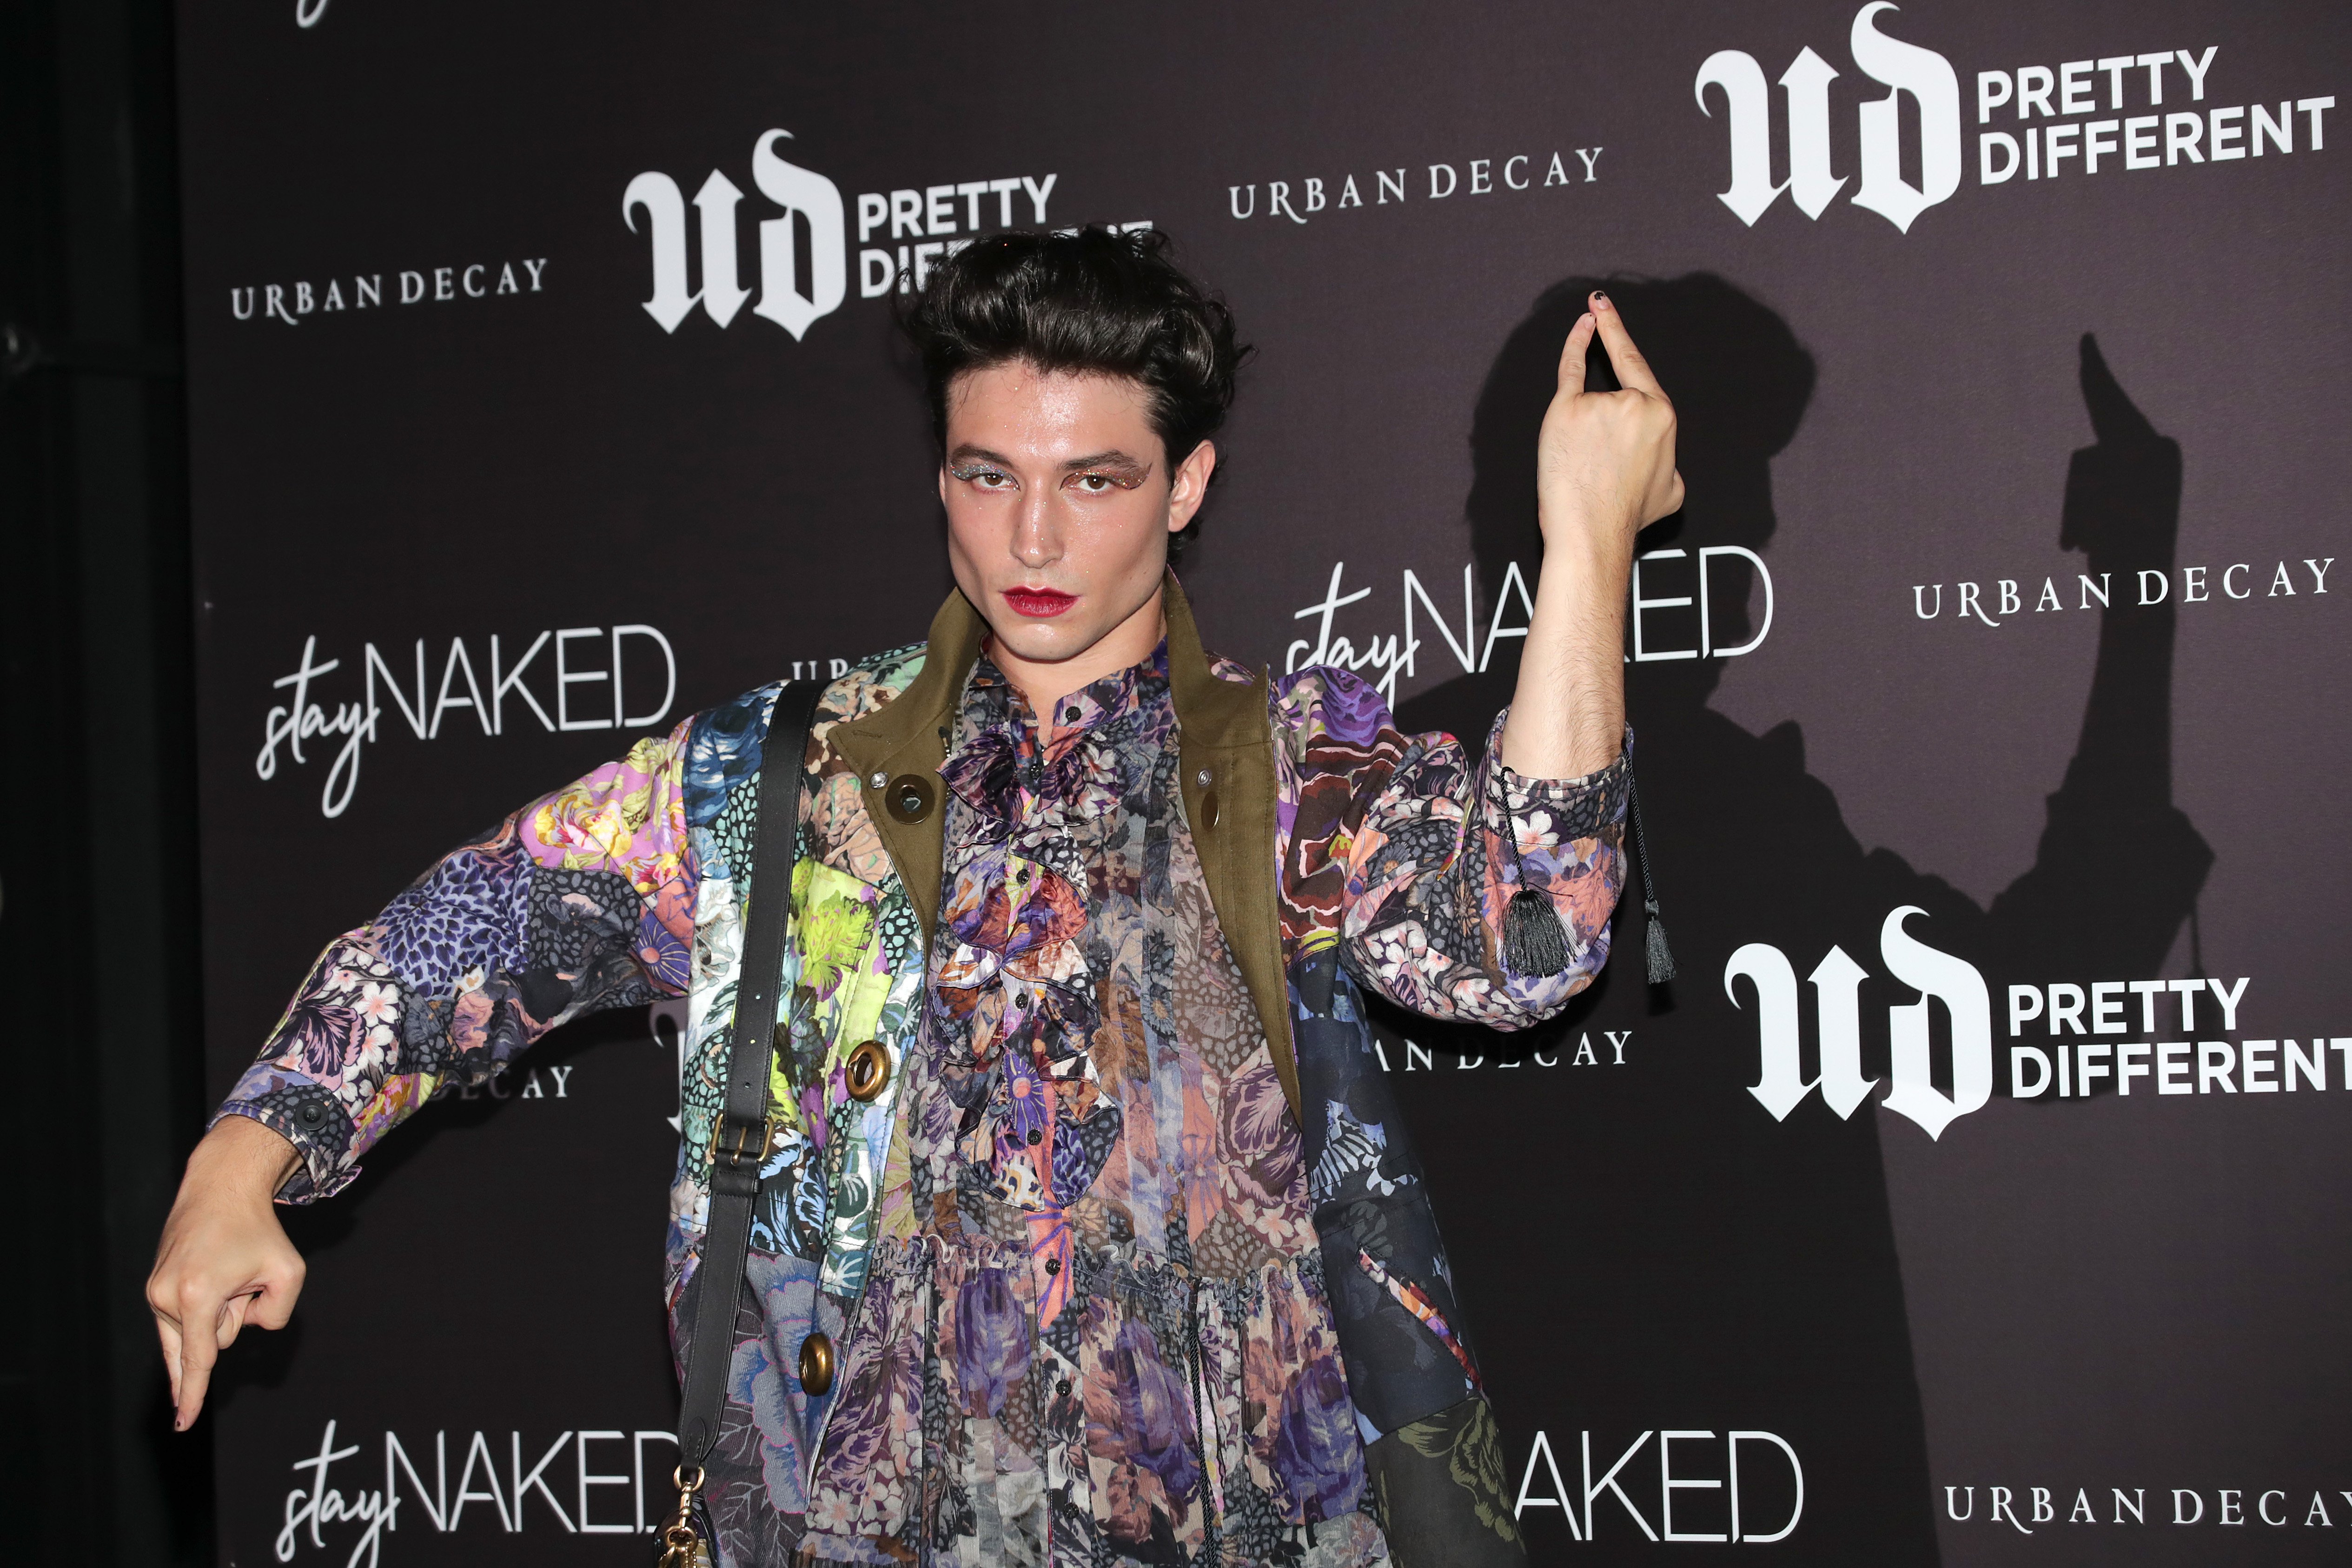 Ezra Miller at the photocall for Urban Decay's Stay Naked launch on August 20, 2019, in Seoul, South Korea | Source: Getty Images